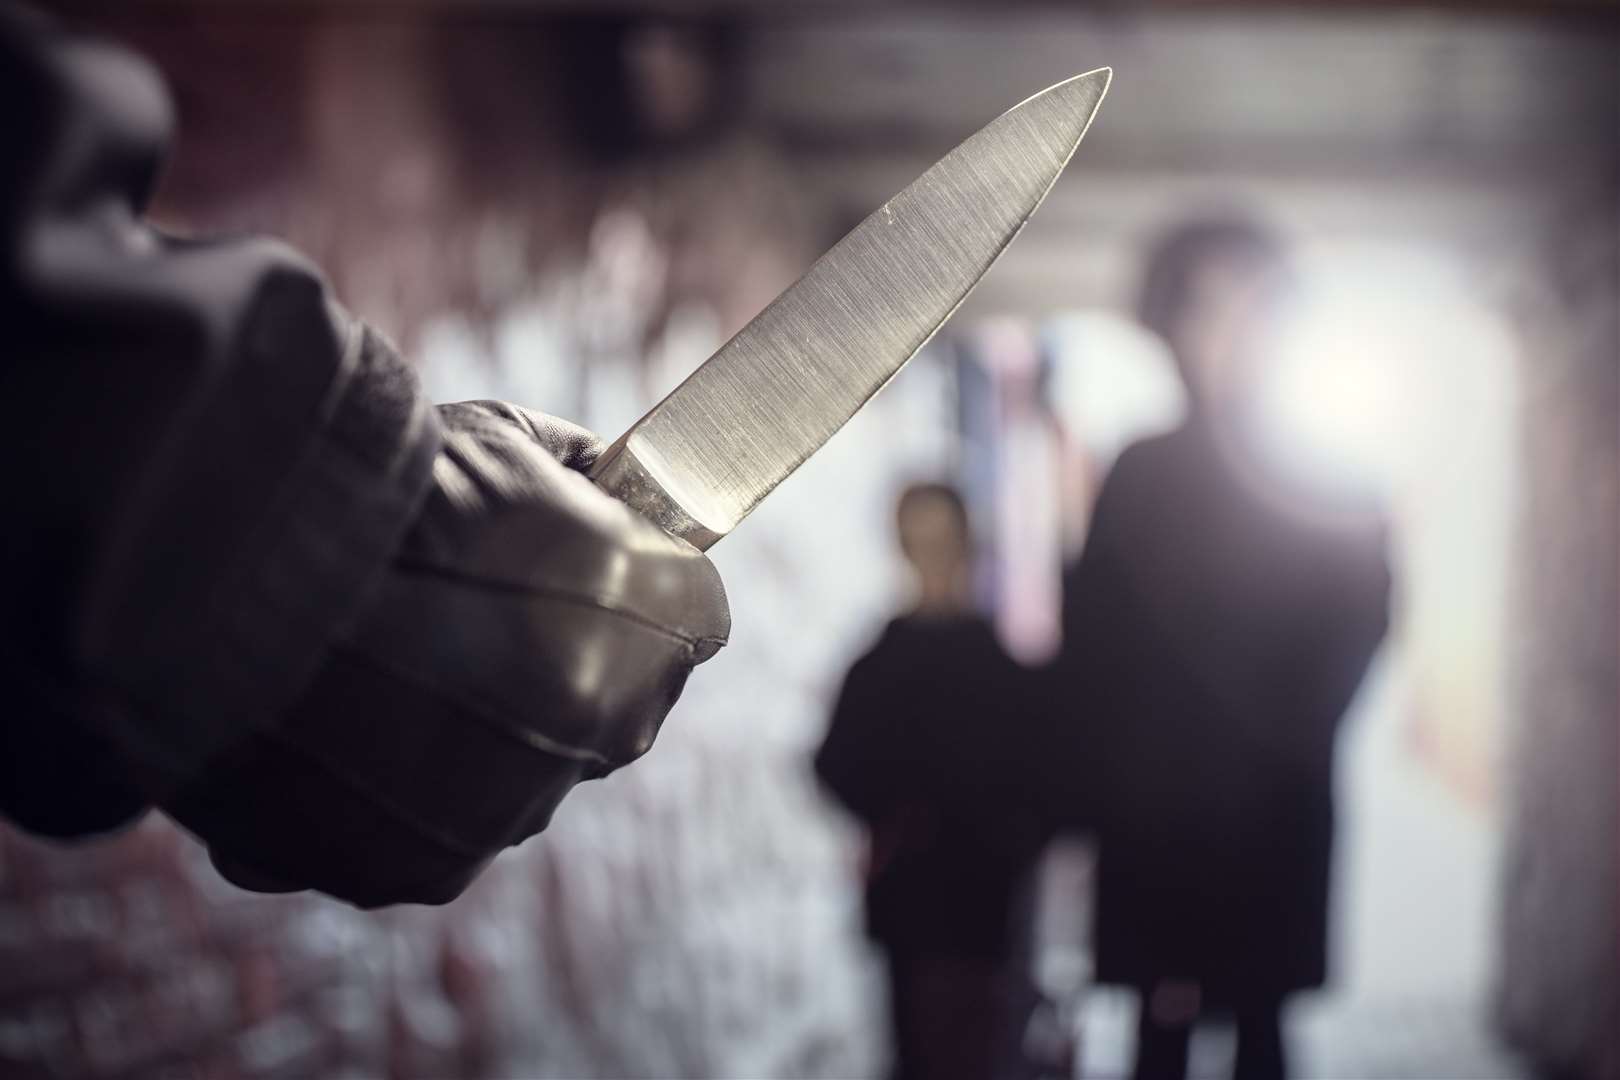 Knife crime has soared in Kent in recent years